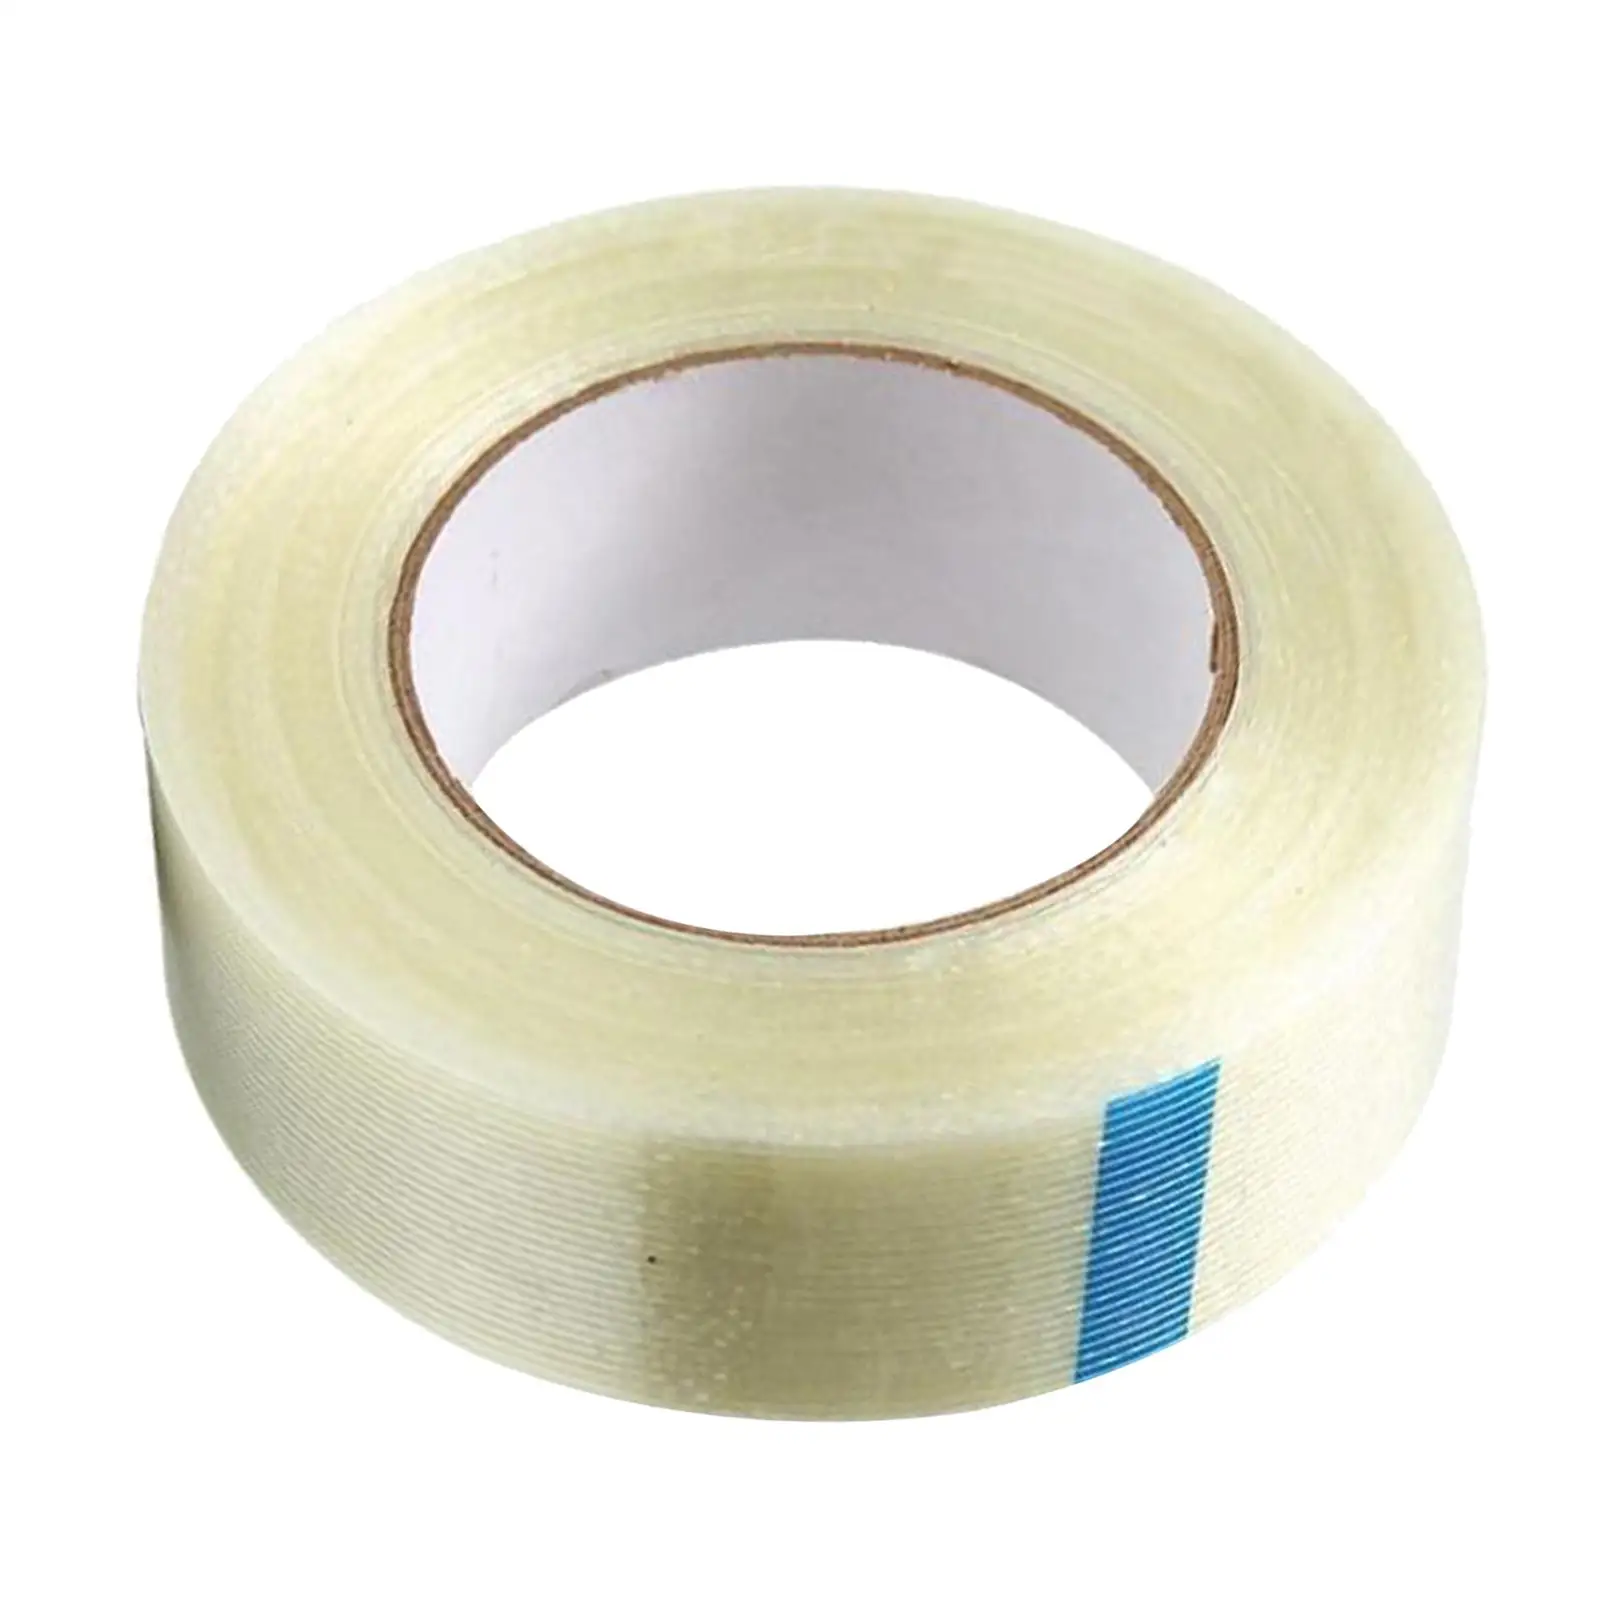 Wig Tape Roll Highly Sticky Bonding Tape for Synthetic Wigs Hair Making Weaving Hairs System